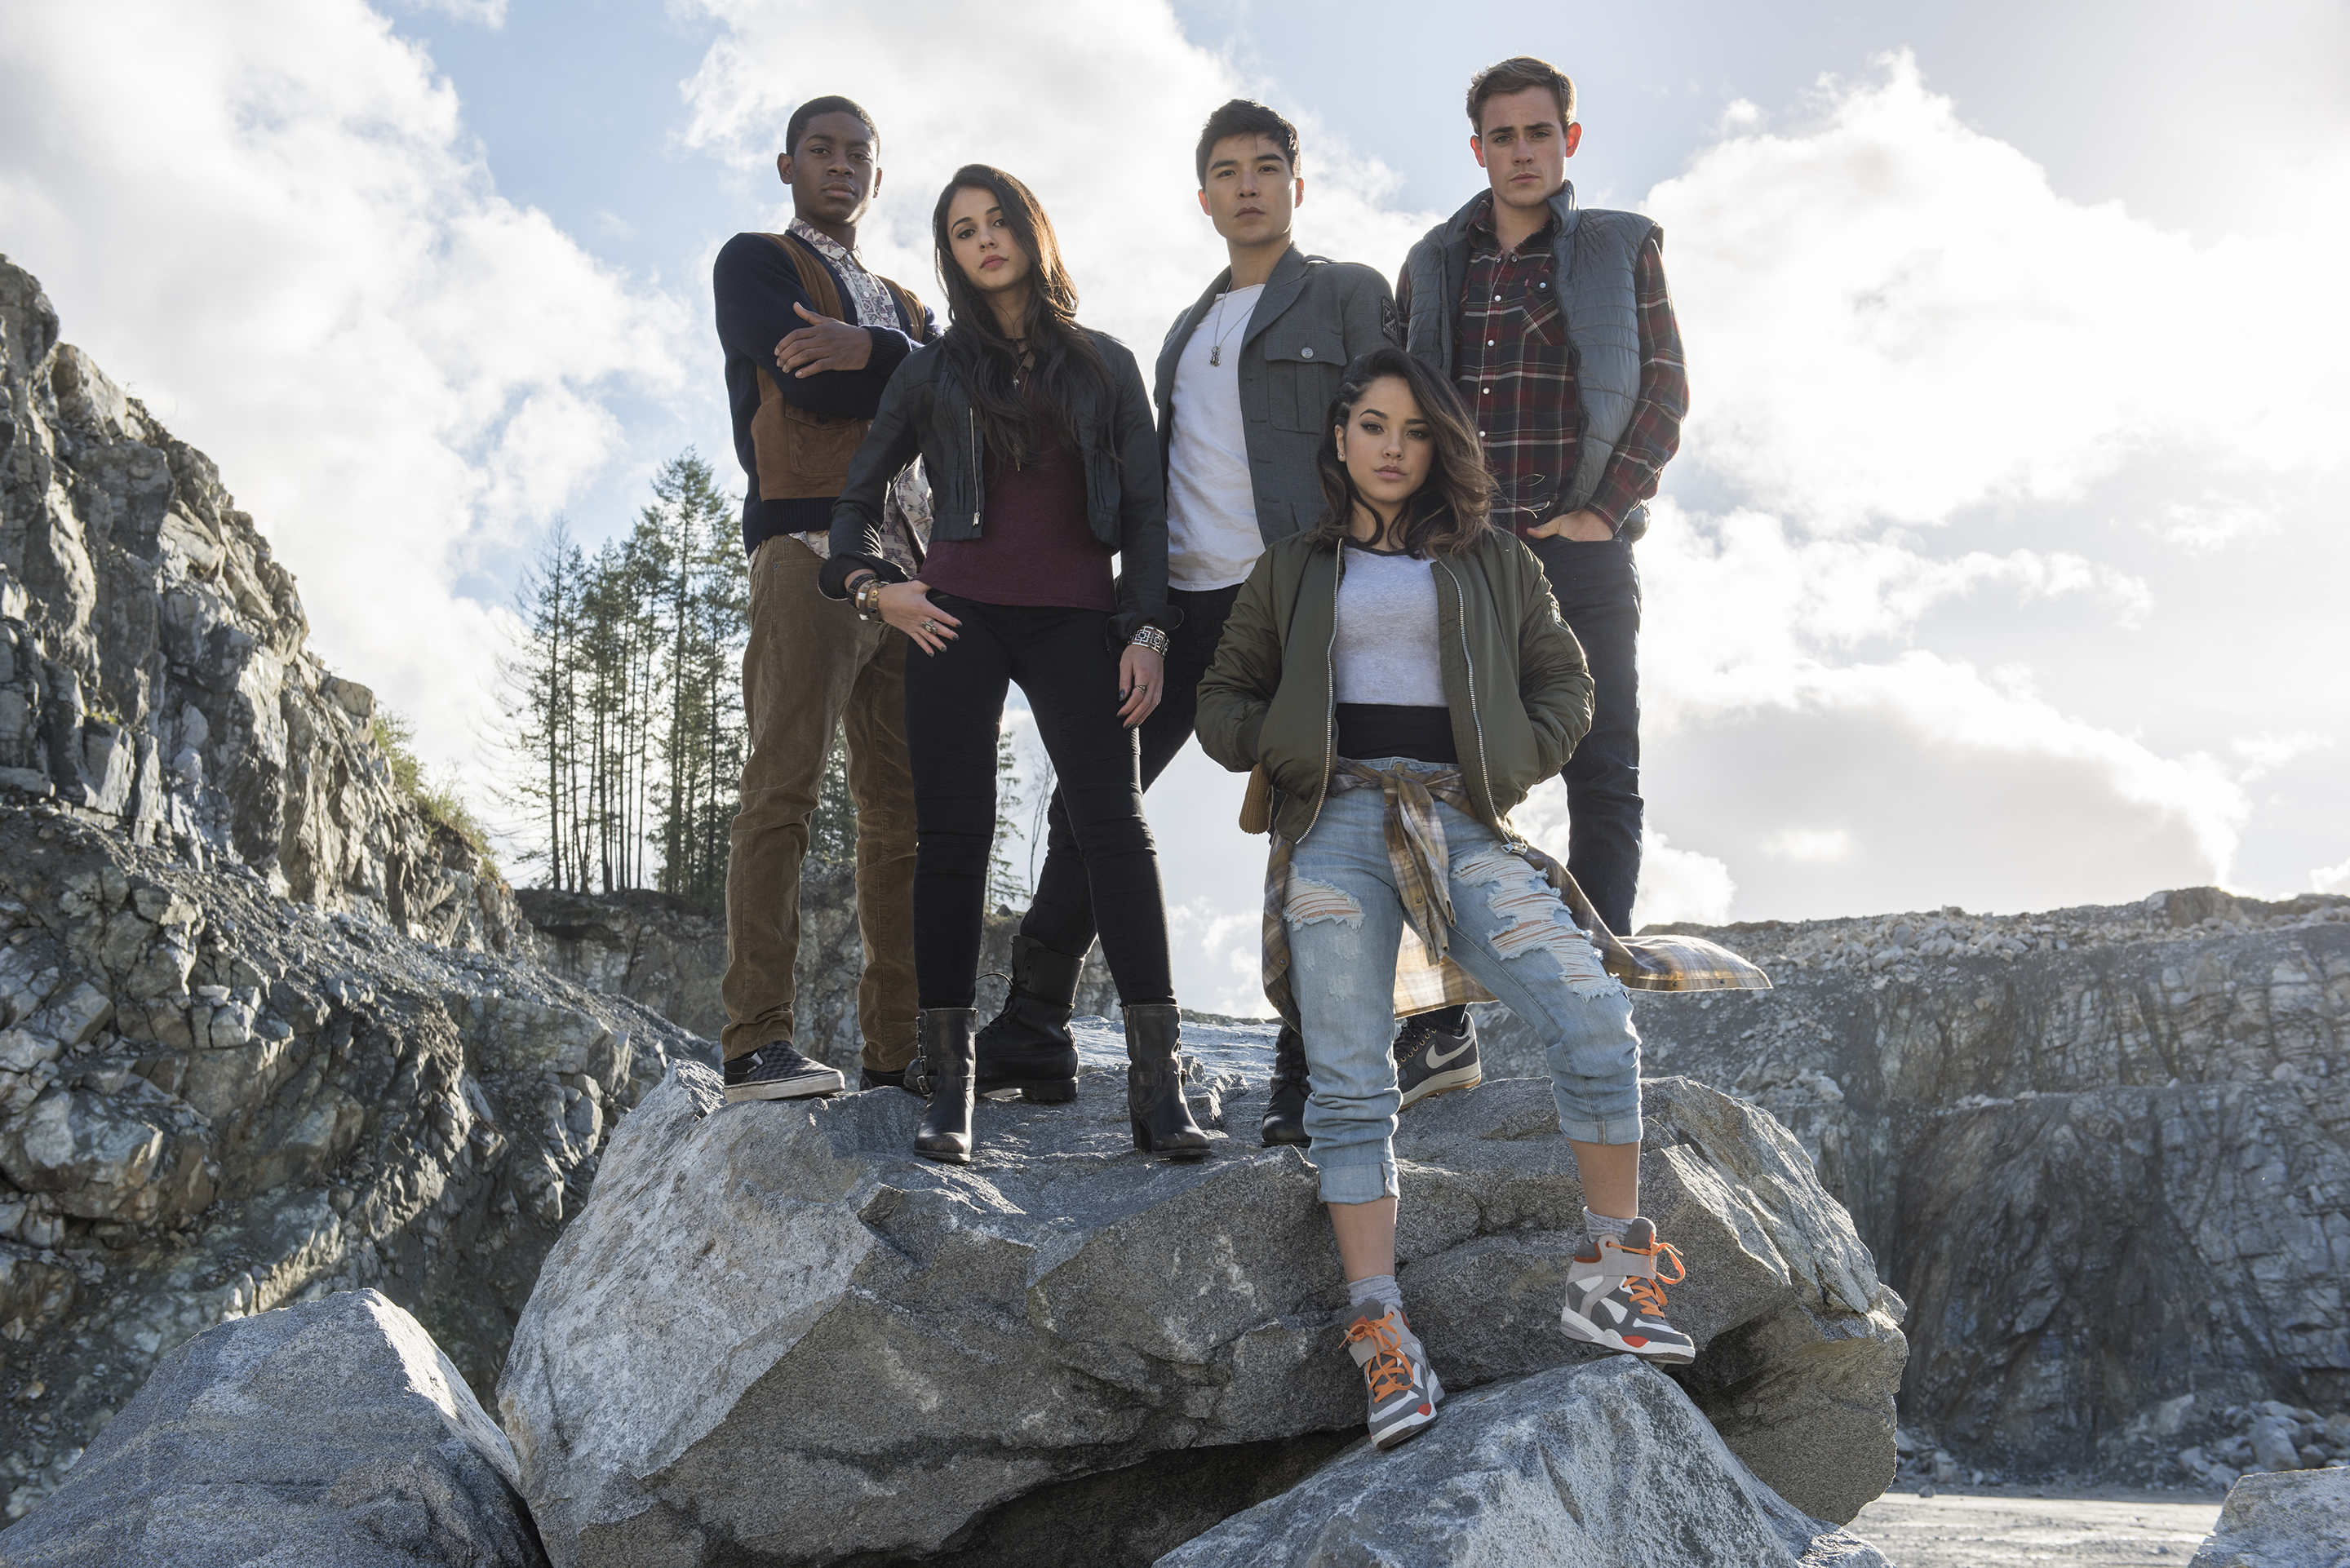 Diversity In Power Rangers Reboot Film Brings New Layers To Well